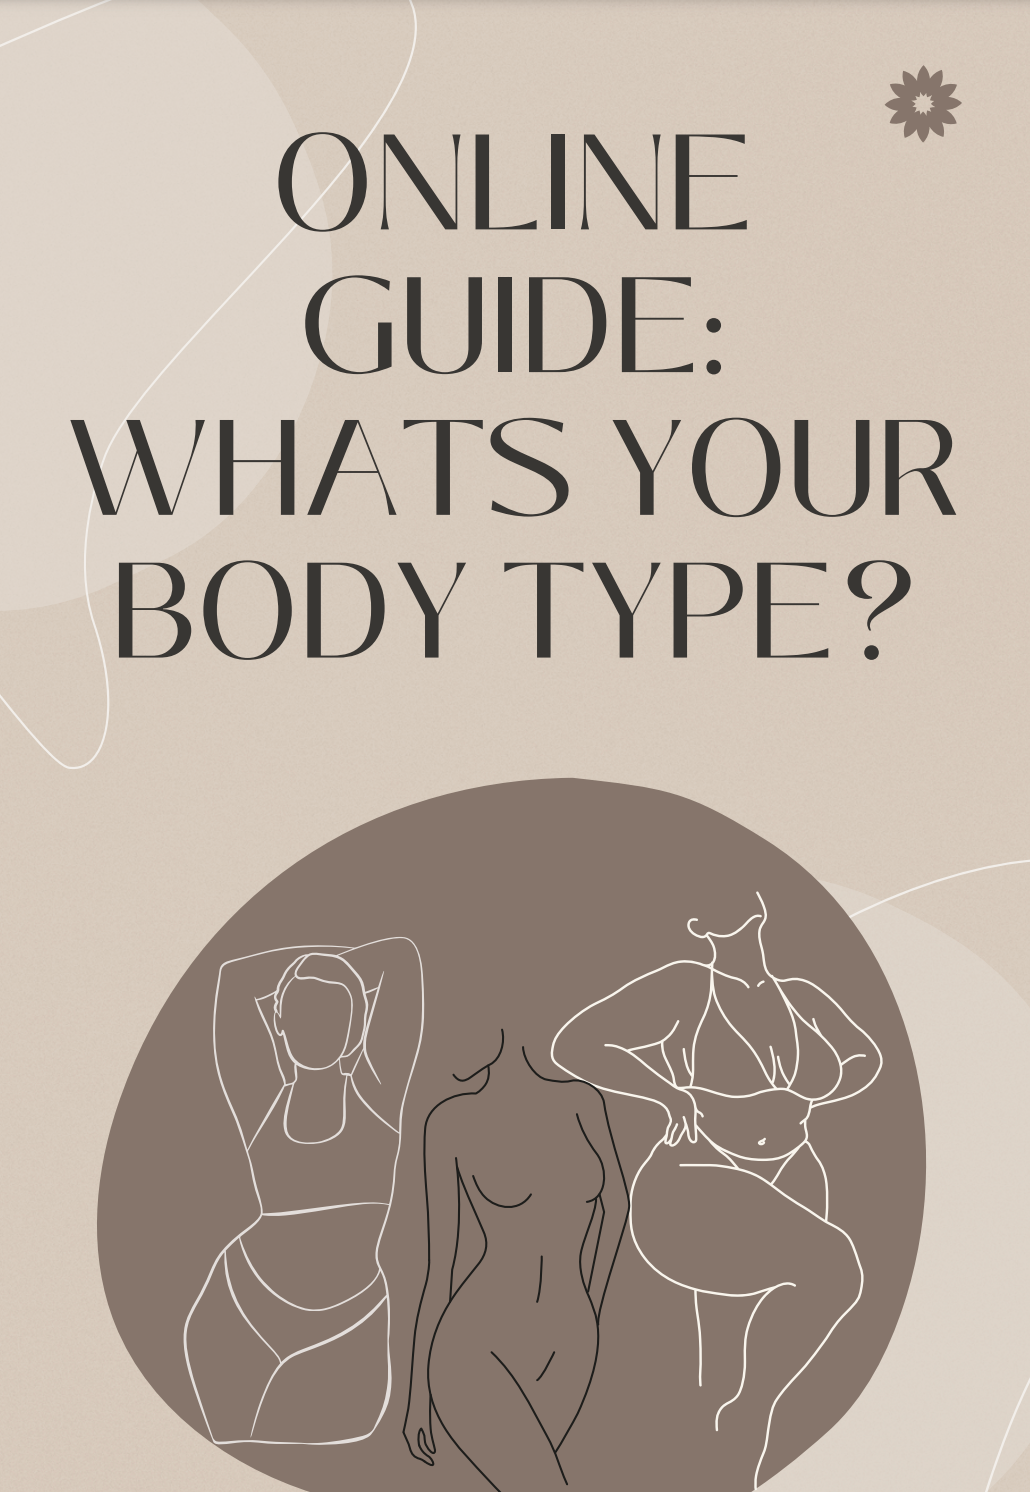 Online Guide: Whats Your Body Type